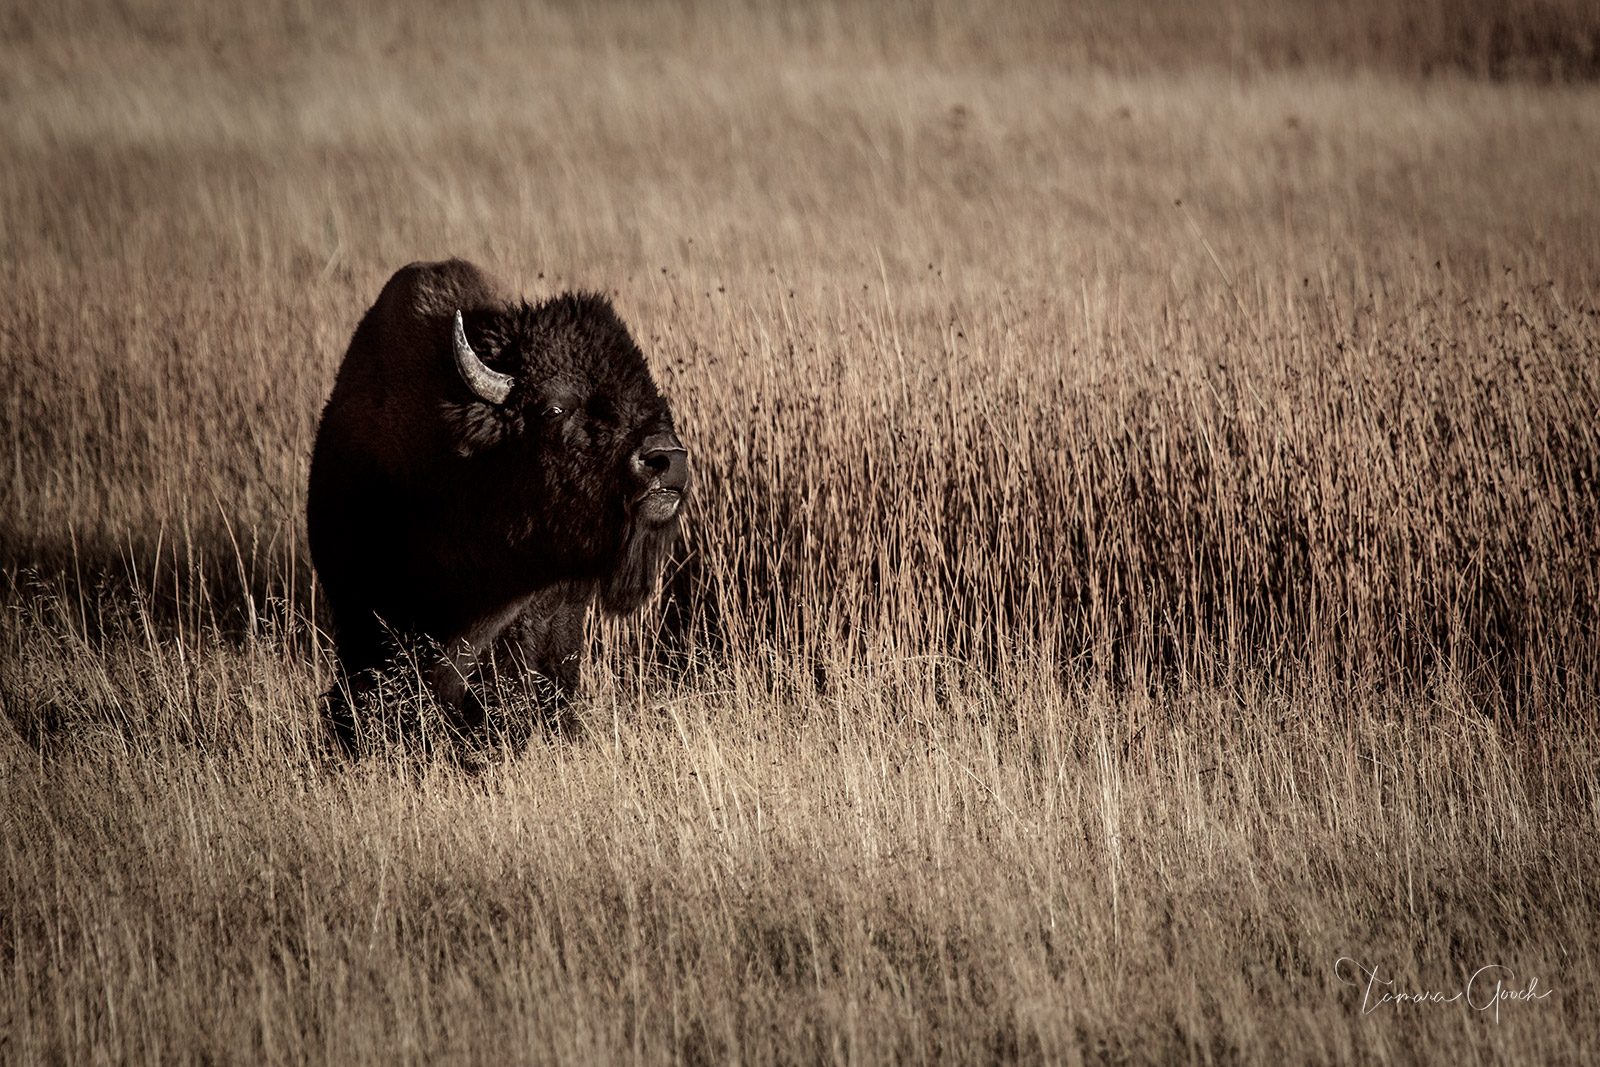 A fine art limited edition print done in modern antique color tones, of a bull bison or American Buffalo standing in the tall fall grass of Yellowstone.